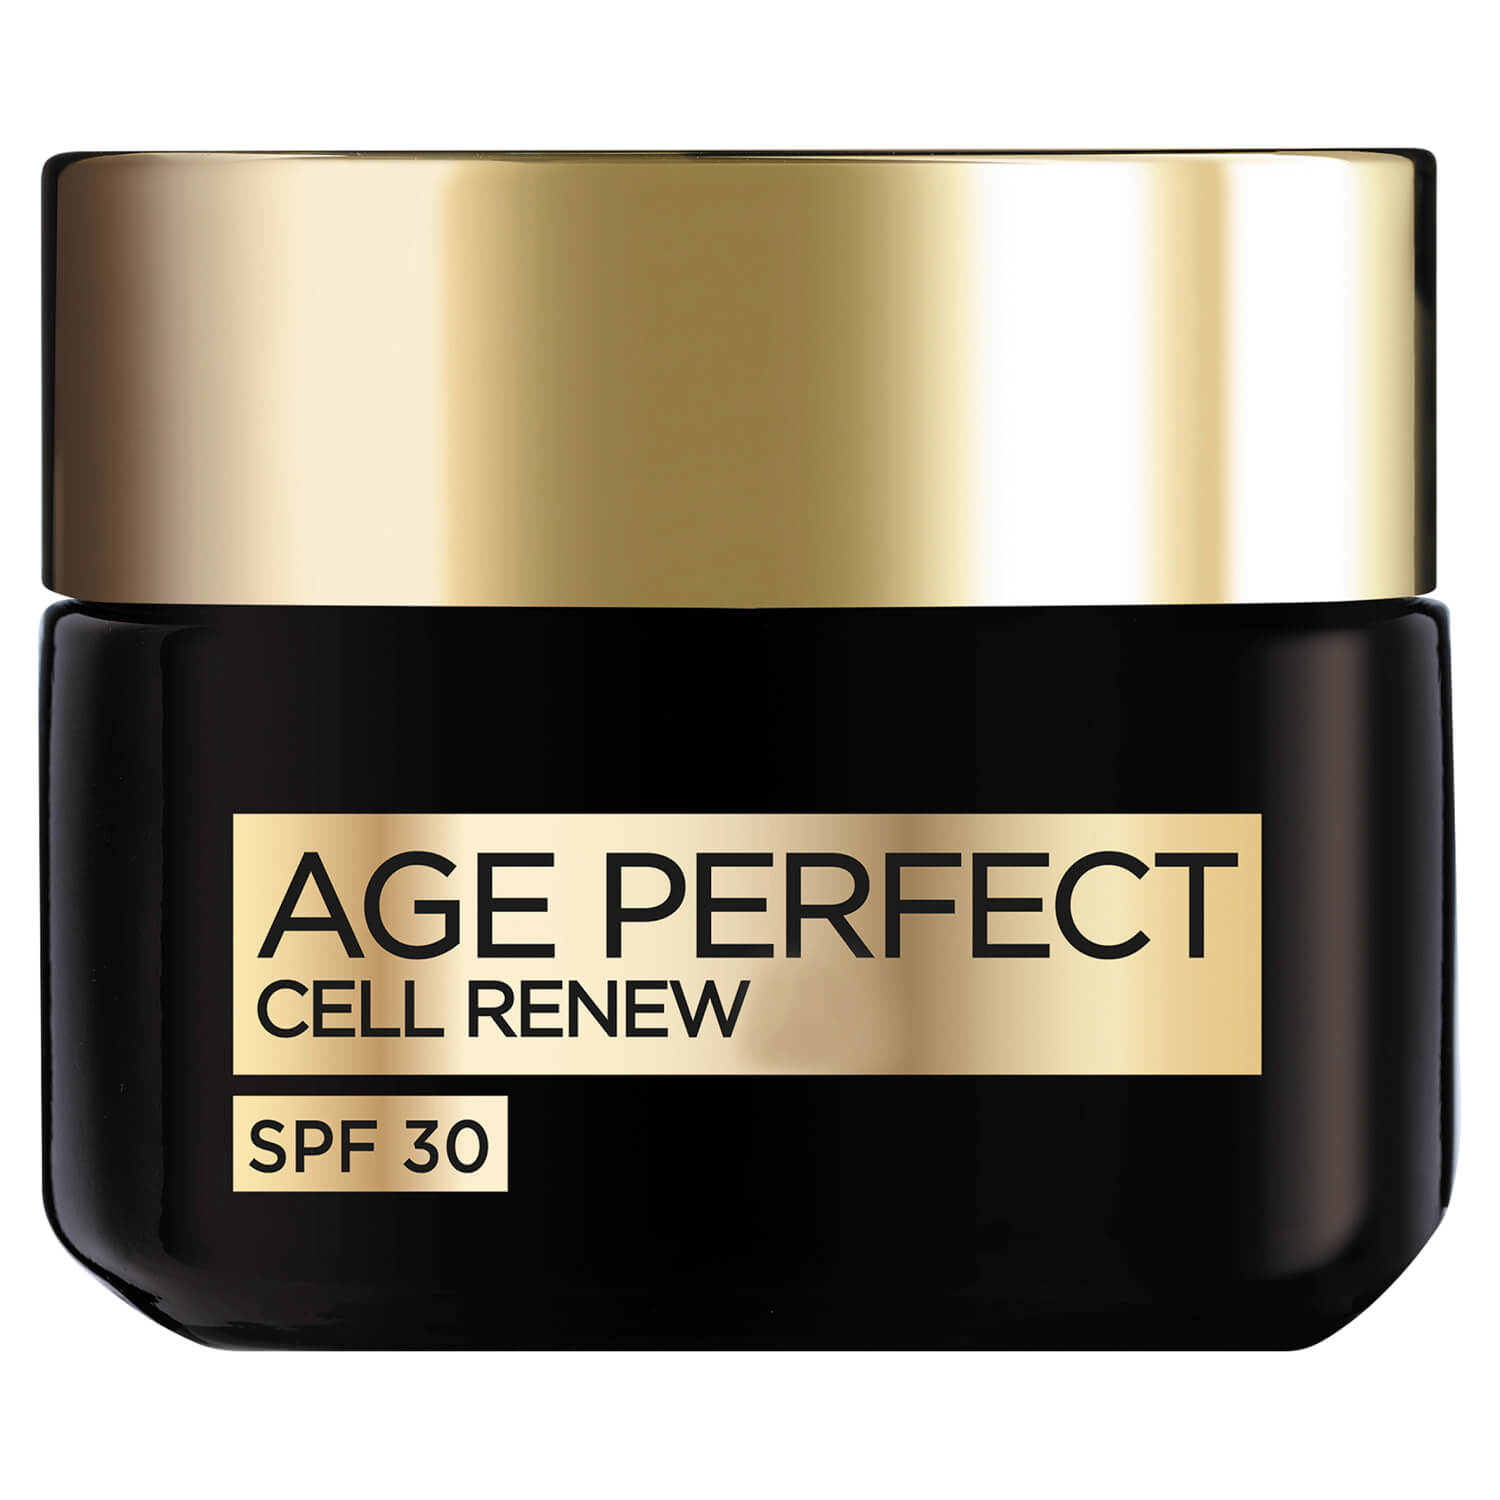 L’ Oréal Age Perfect Cell Renew Day Cream SPF30 - 50ml 1 Shaws Department Stores